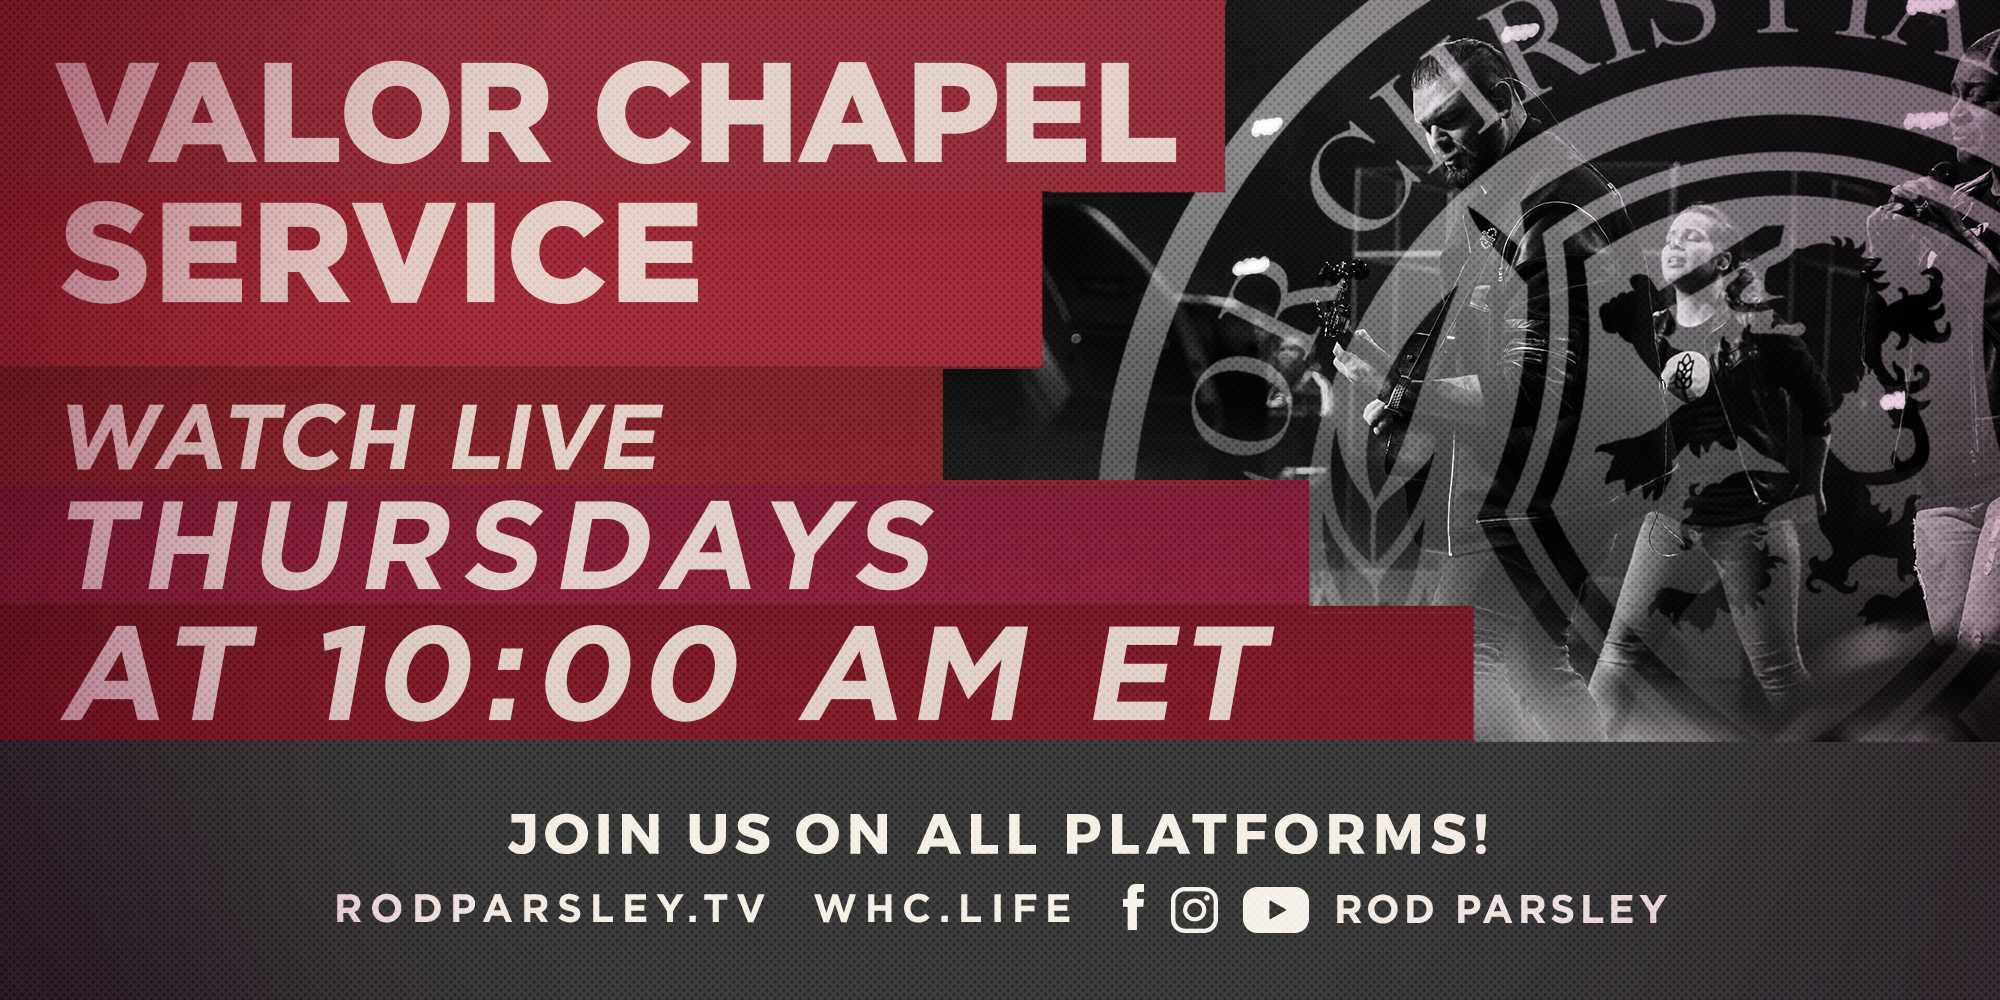 Valor Chapel Service Watch Live Thursdays at 10:00AM ET Join us on all Platforms! Rodparsley.tv WHC.LIFE Facebook Instagram Youtube Rod Parsley